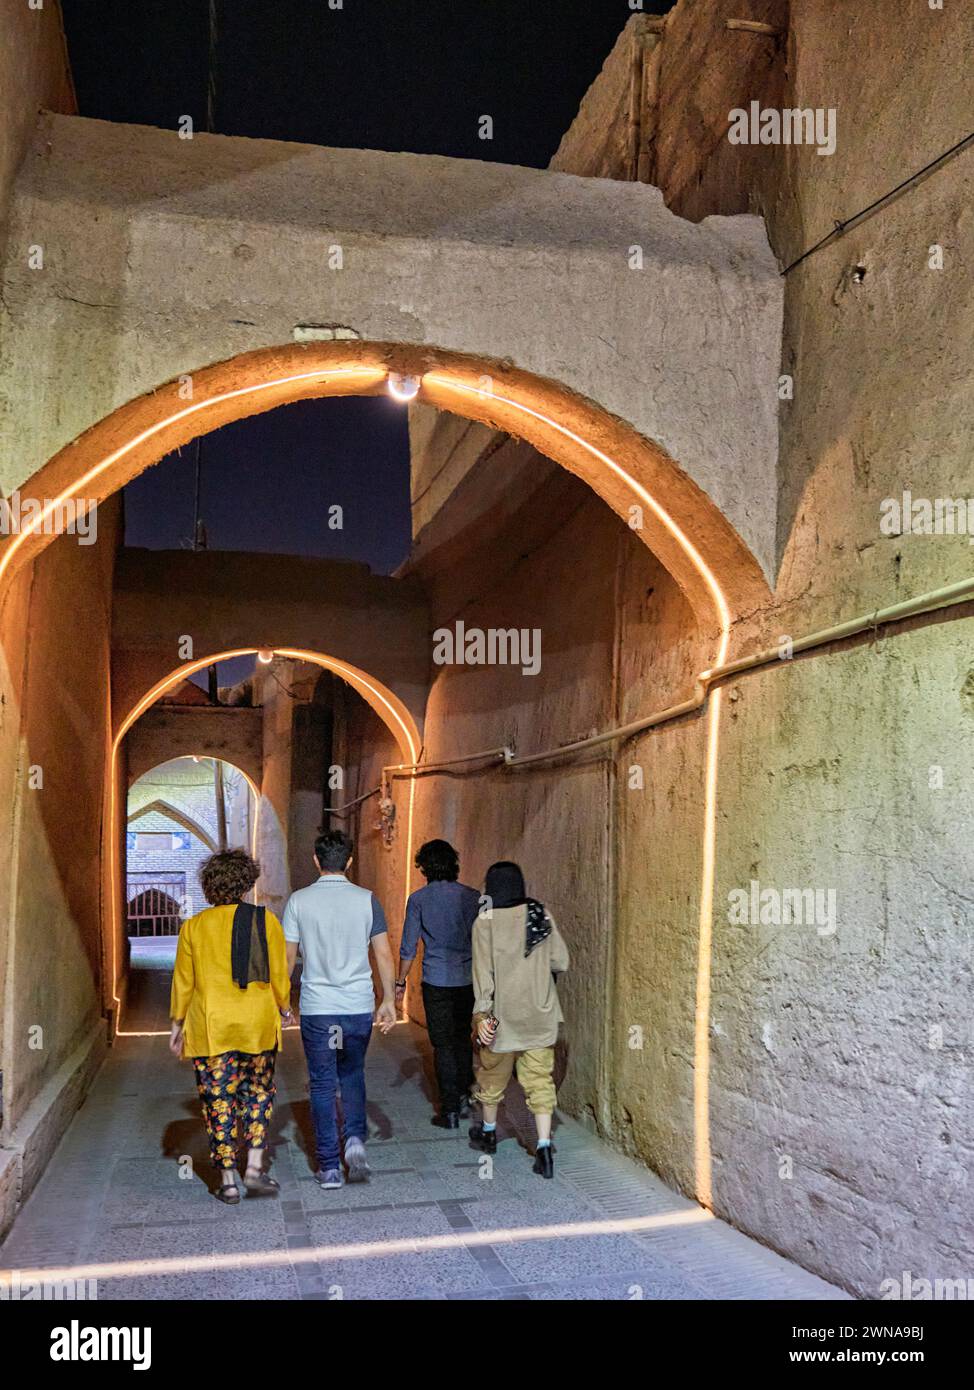 People walk in a narrow street with arches brightly illuminated at night in the historical Fahadan Neighborhood of Yazd, Iran. Stock Photo